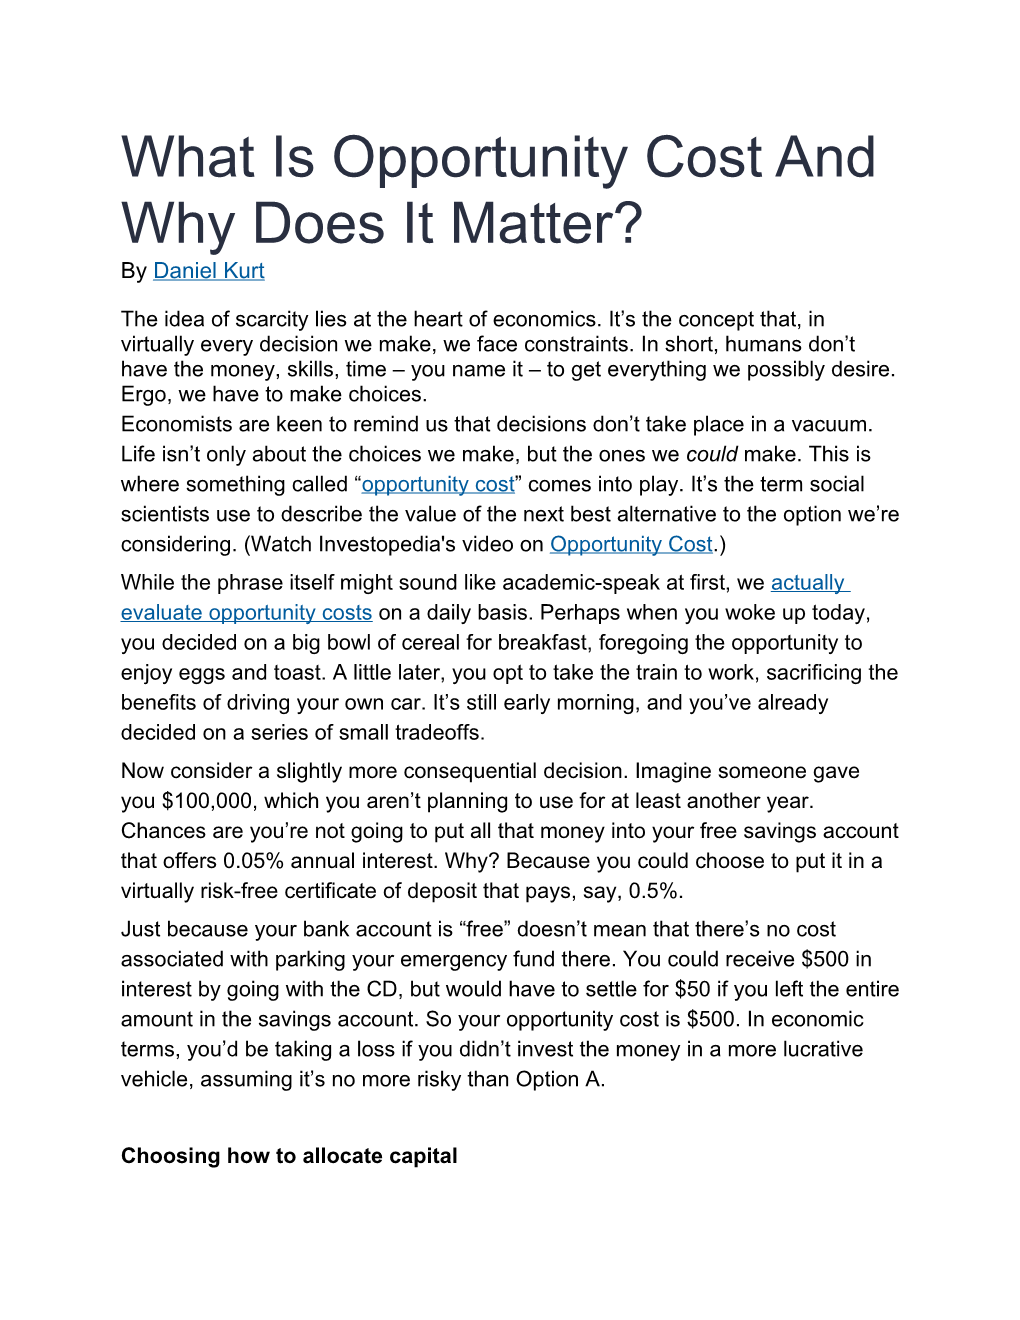 What Is Opportunity Cost and Why Does It Matter?